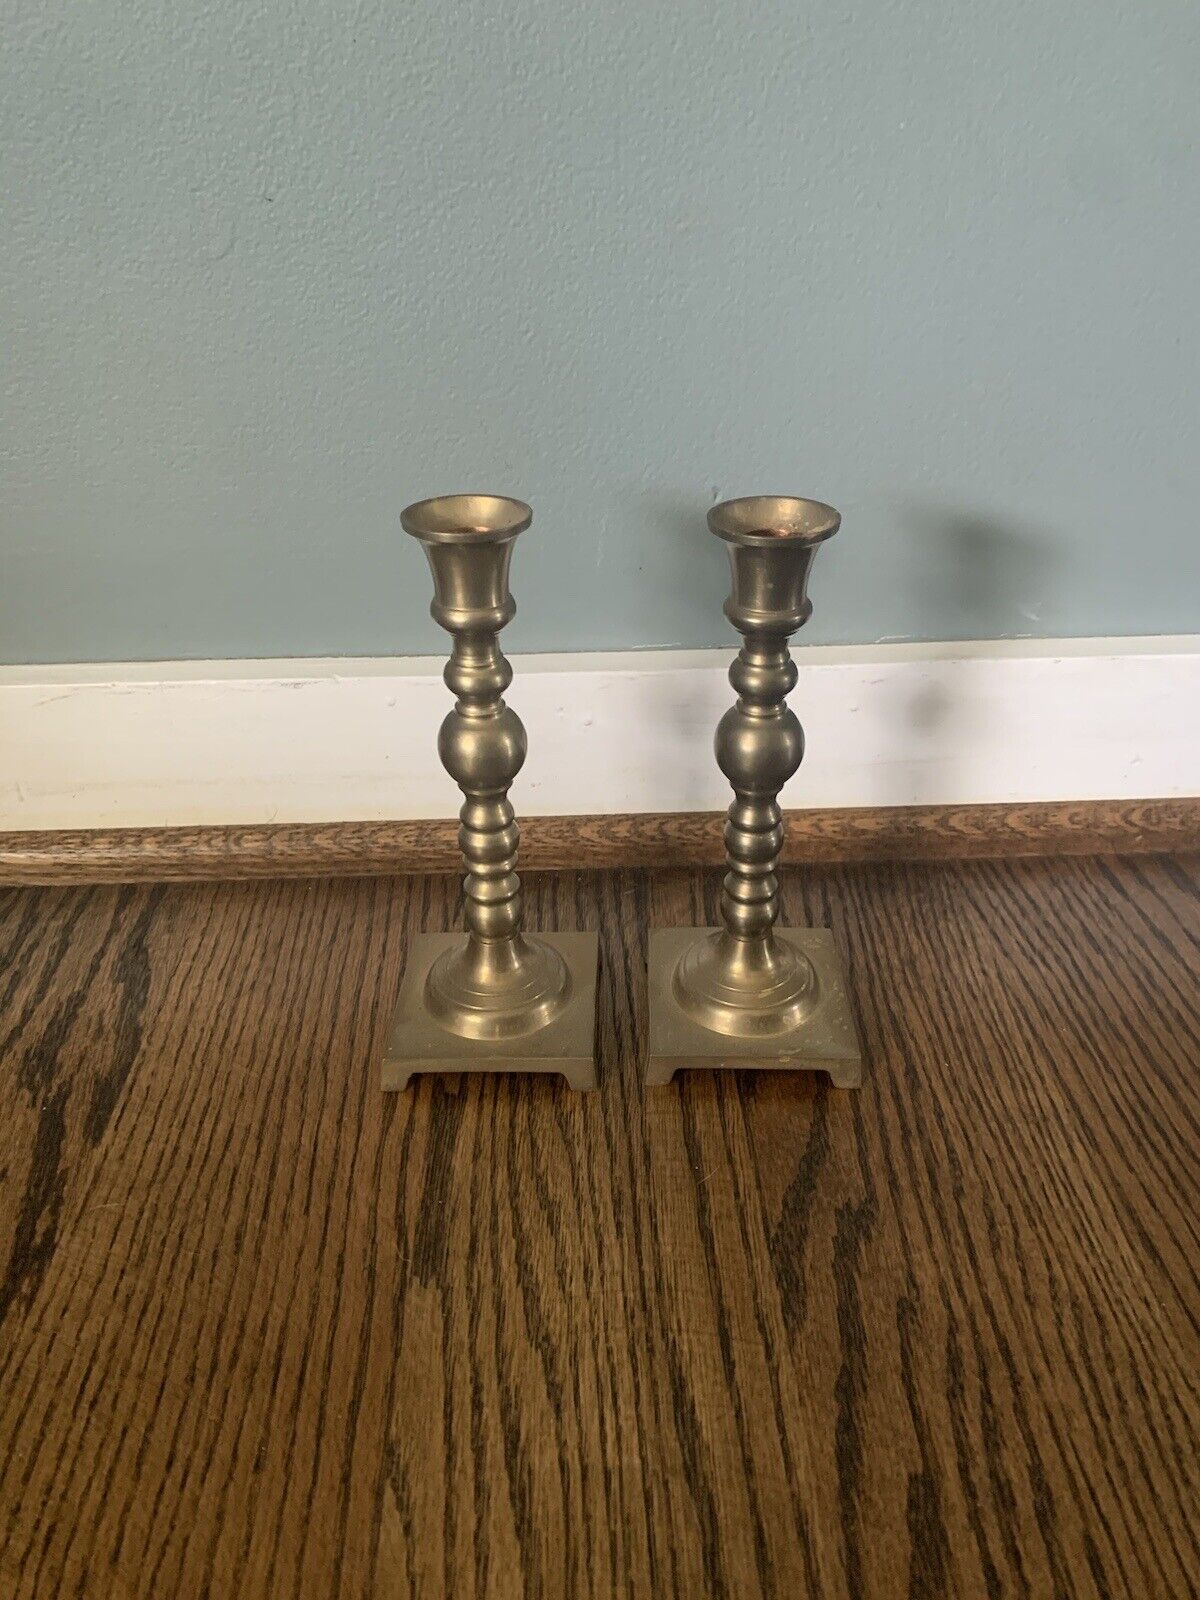 Pair of Vintage Brass Candle Holders